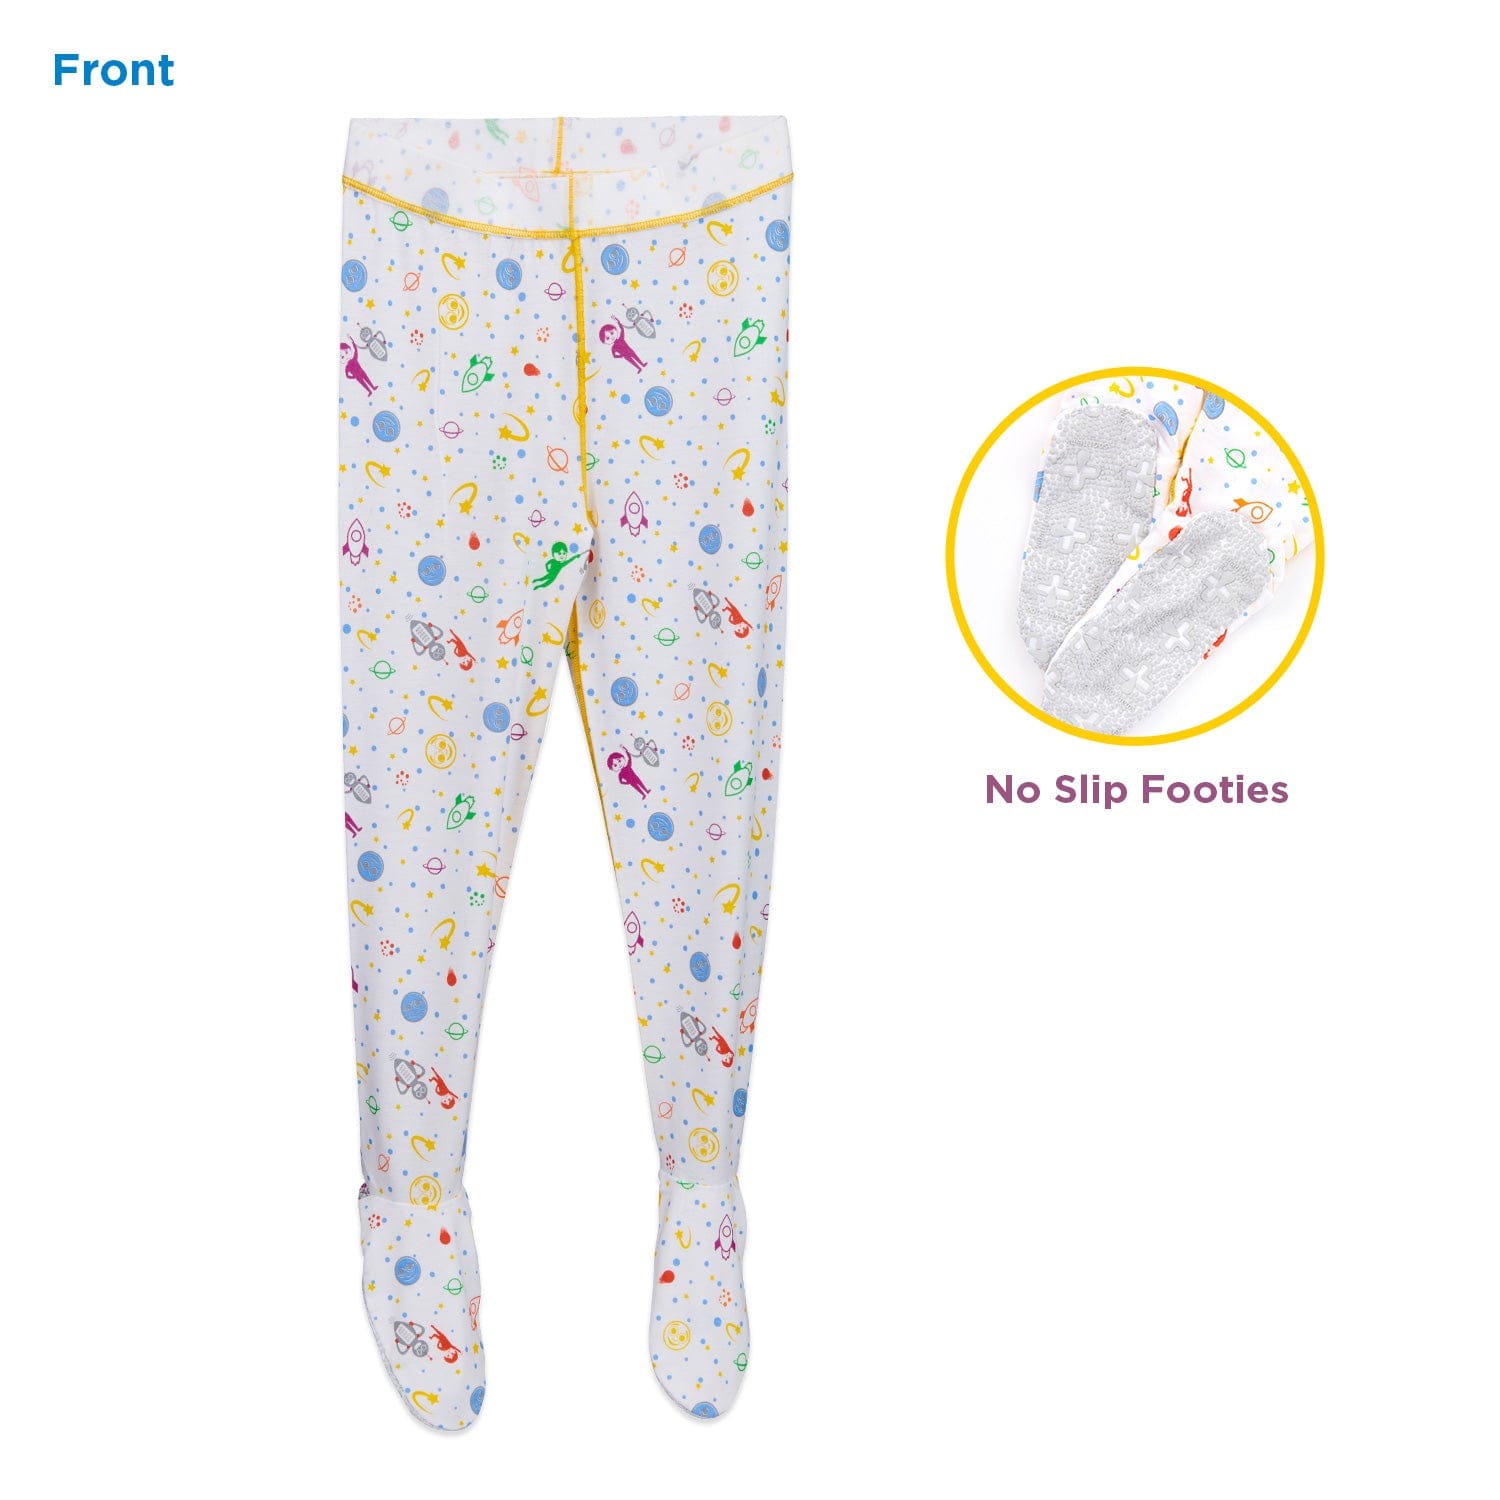 “Eczema Sleepwear and Clothing Leggings for boys and girls Stop leg, knee, ankle and foot itching at Night”